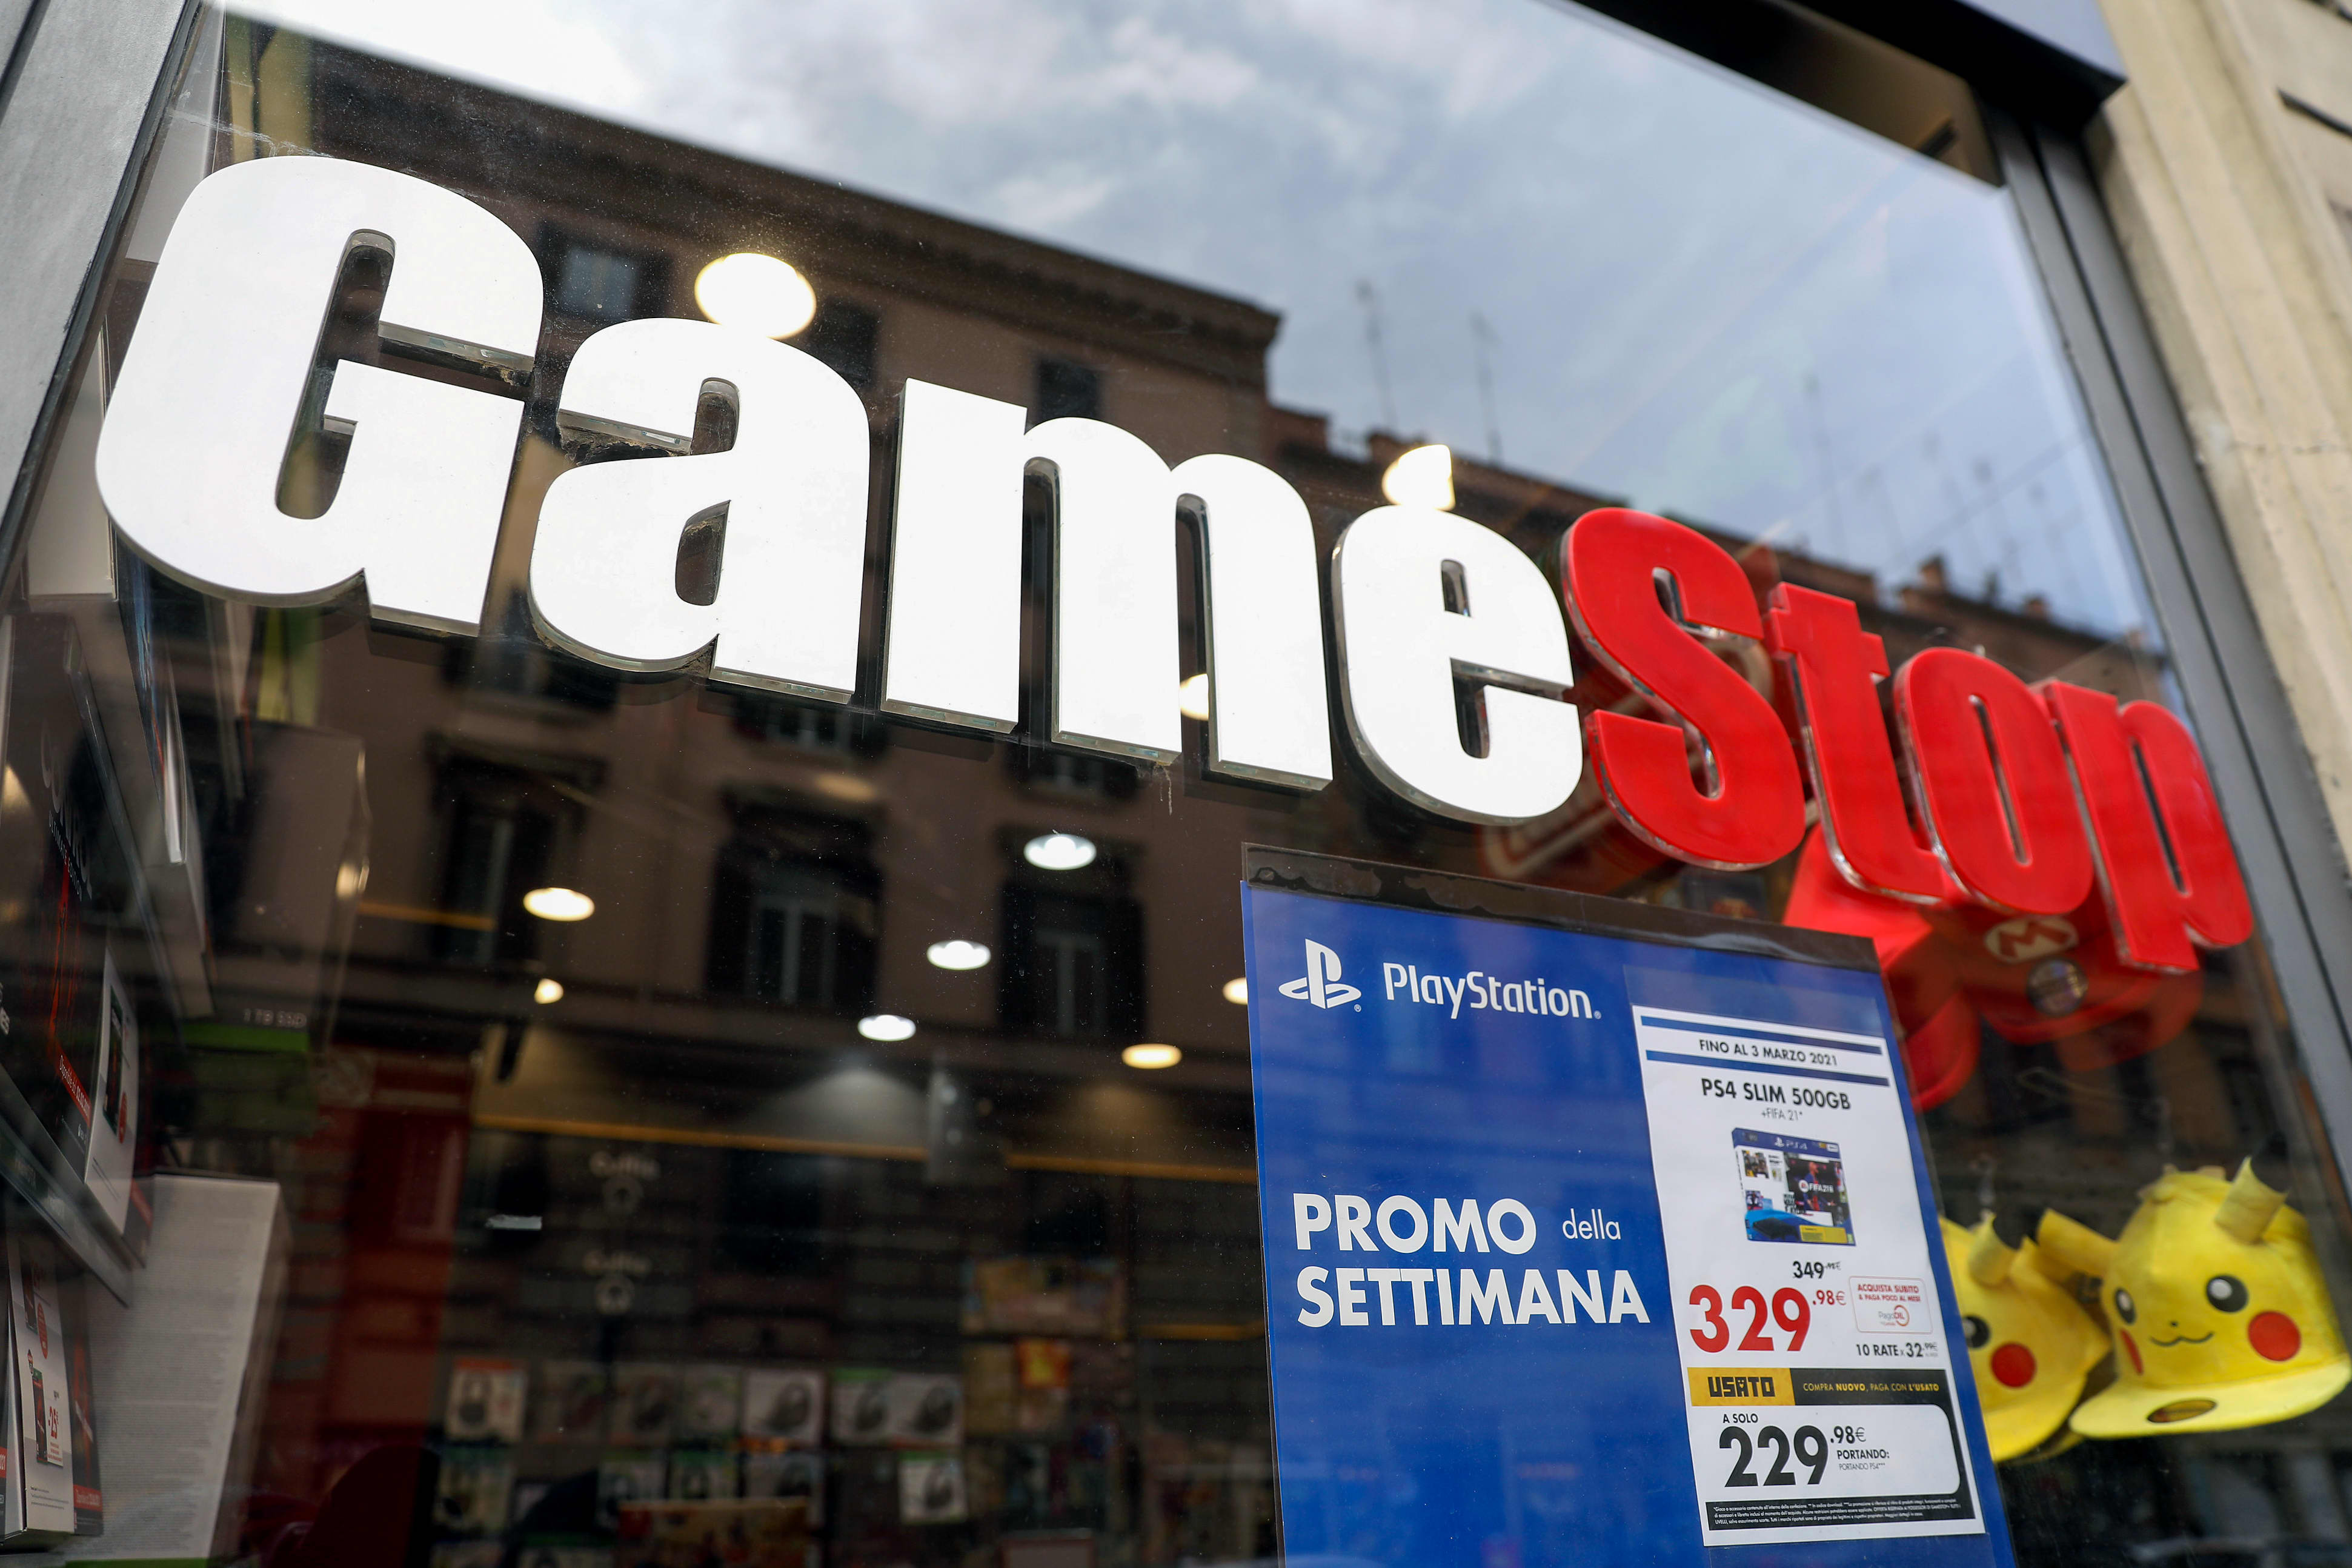 Melvin Capital, which bet against GameStop, lost more than 50% in January, report says - CNBC